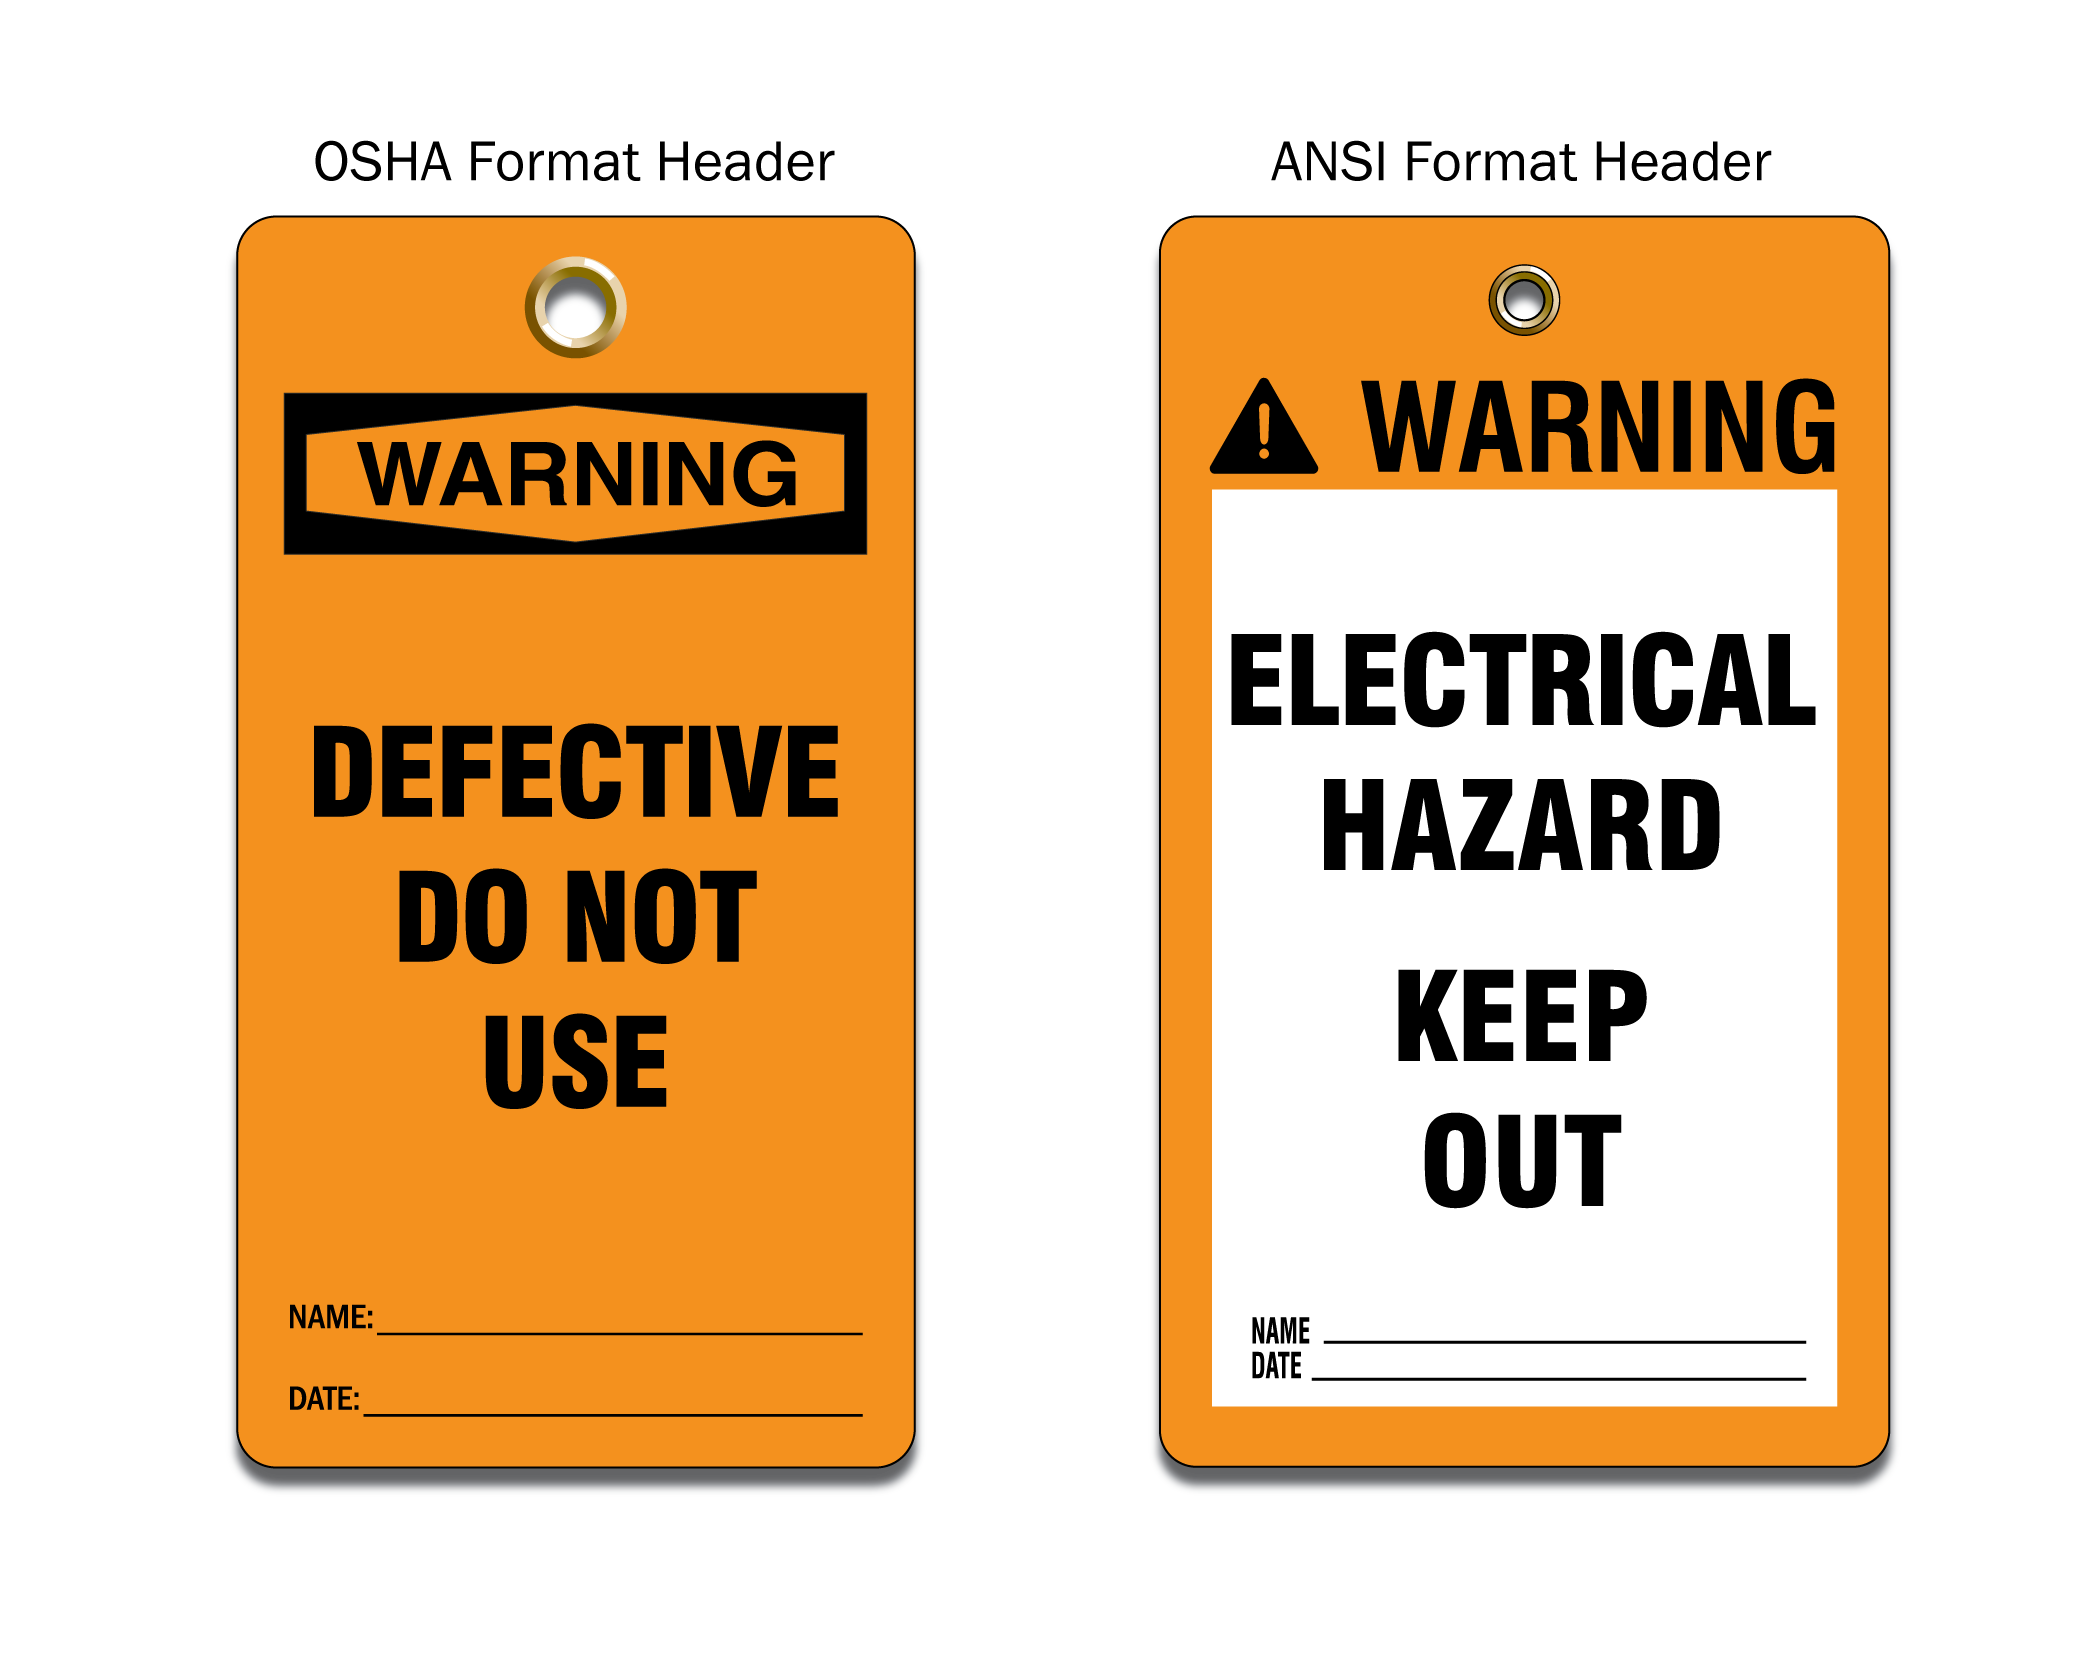 An image of two rectangular Warning tags with black text on orange and white backgrounds. One tag is OSHA format and the other is ANSI format.